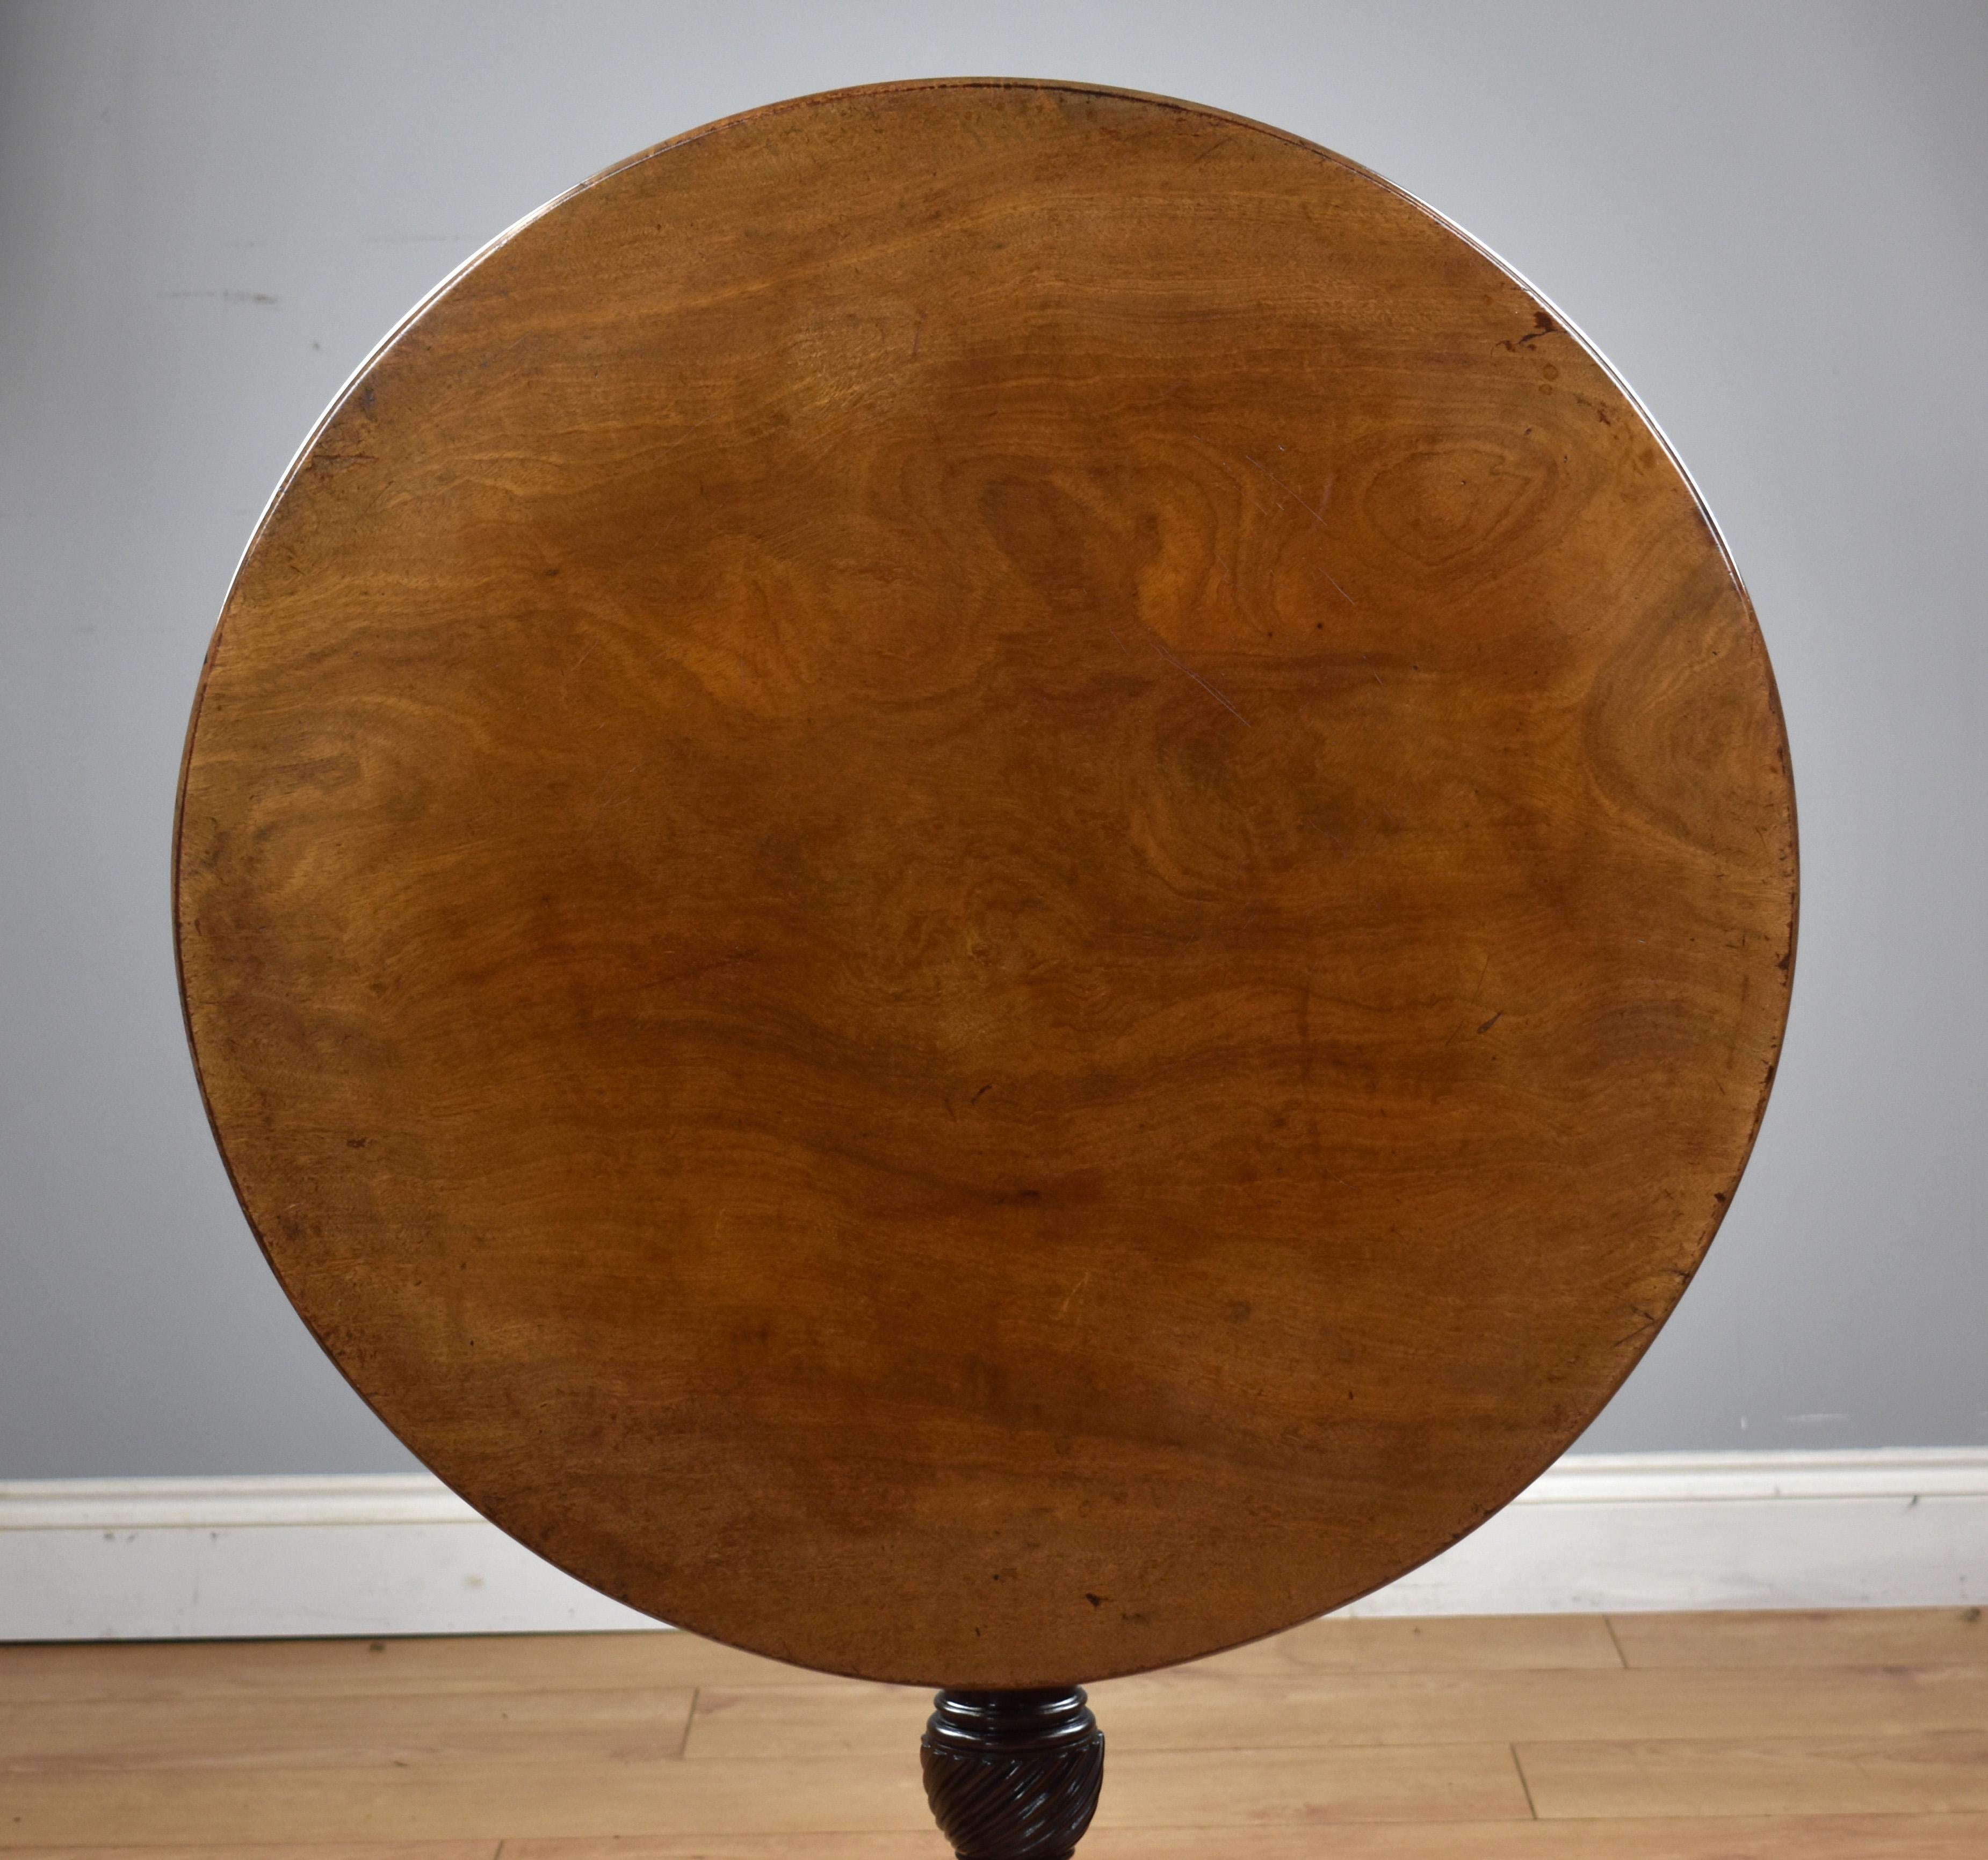 A very good quality George III mahogany tripod table, having a single piece solid mahogany top, above a bird cage mechanism above a turned stem with a writhed carving to the base, above three elegant legs. The table remains in good untouched